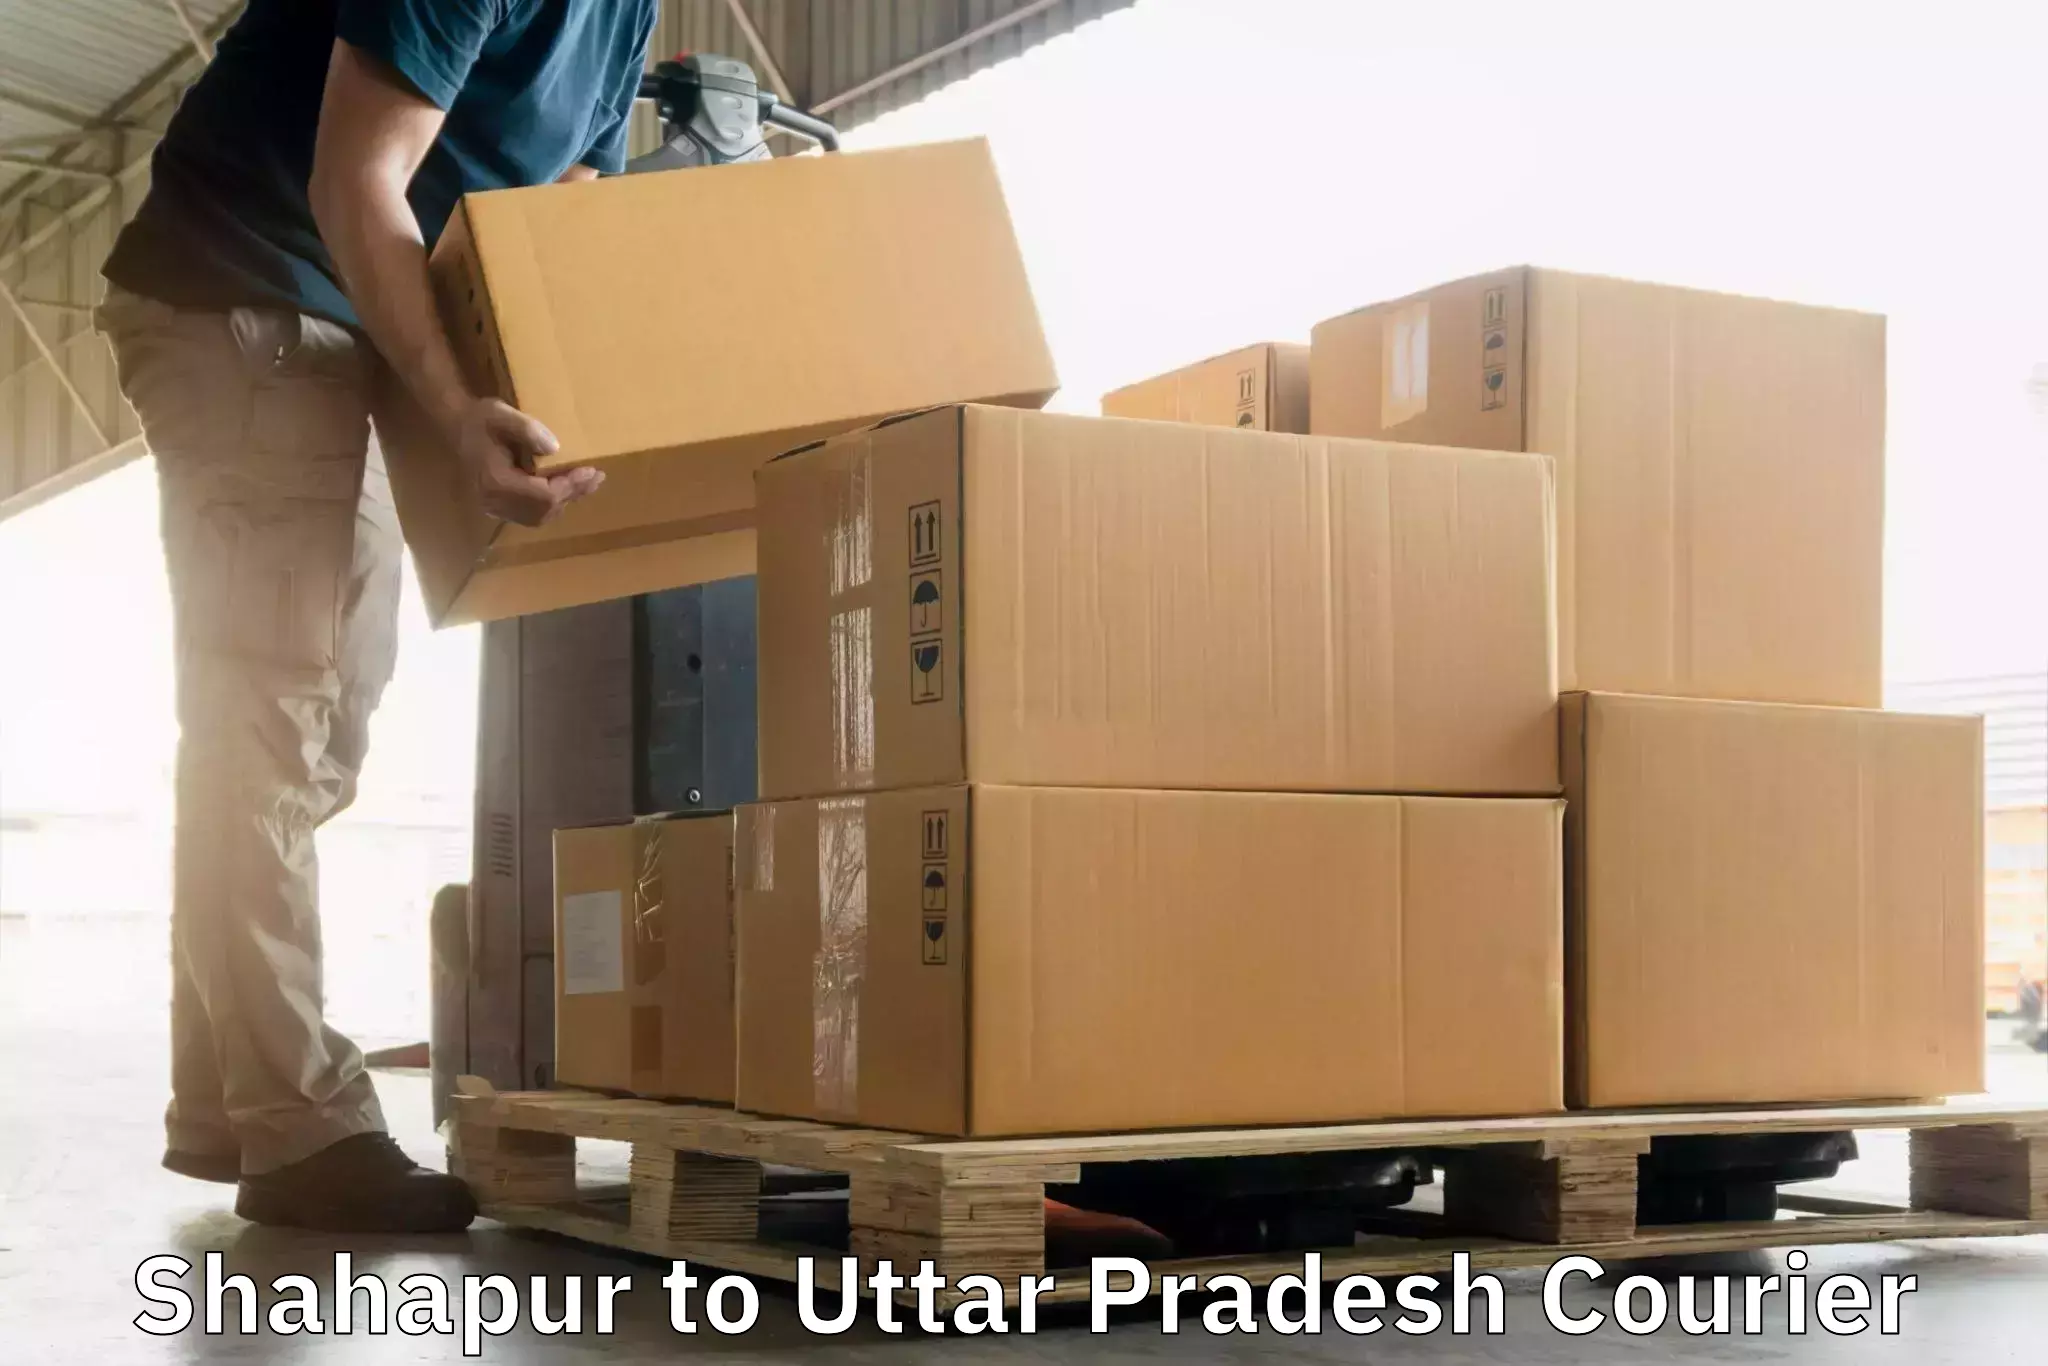 Reliable parcel services Shahapur to Shahjahanpur